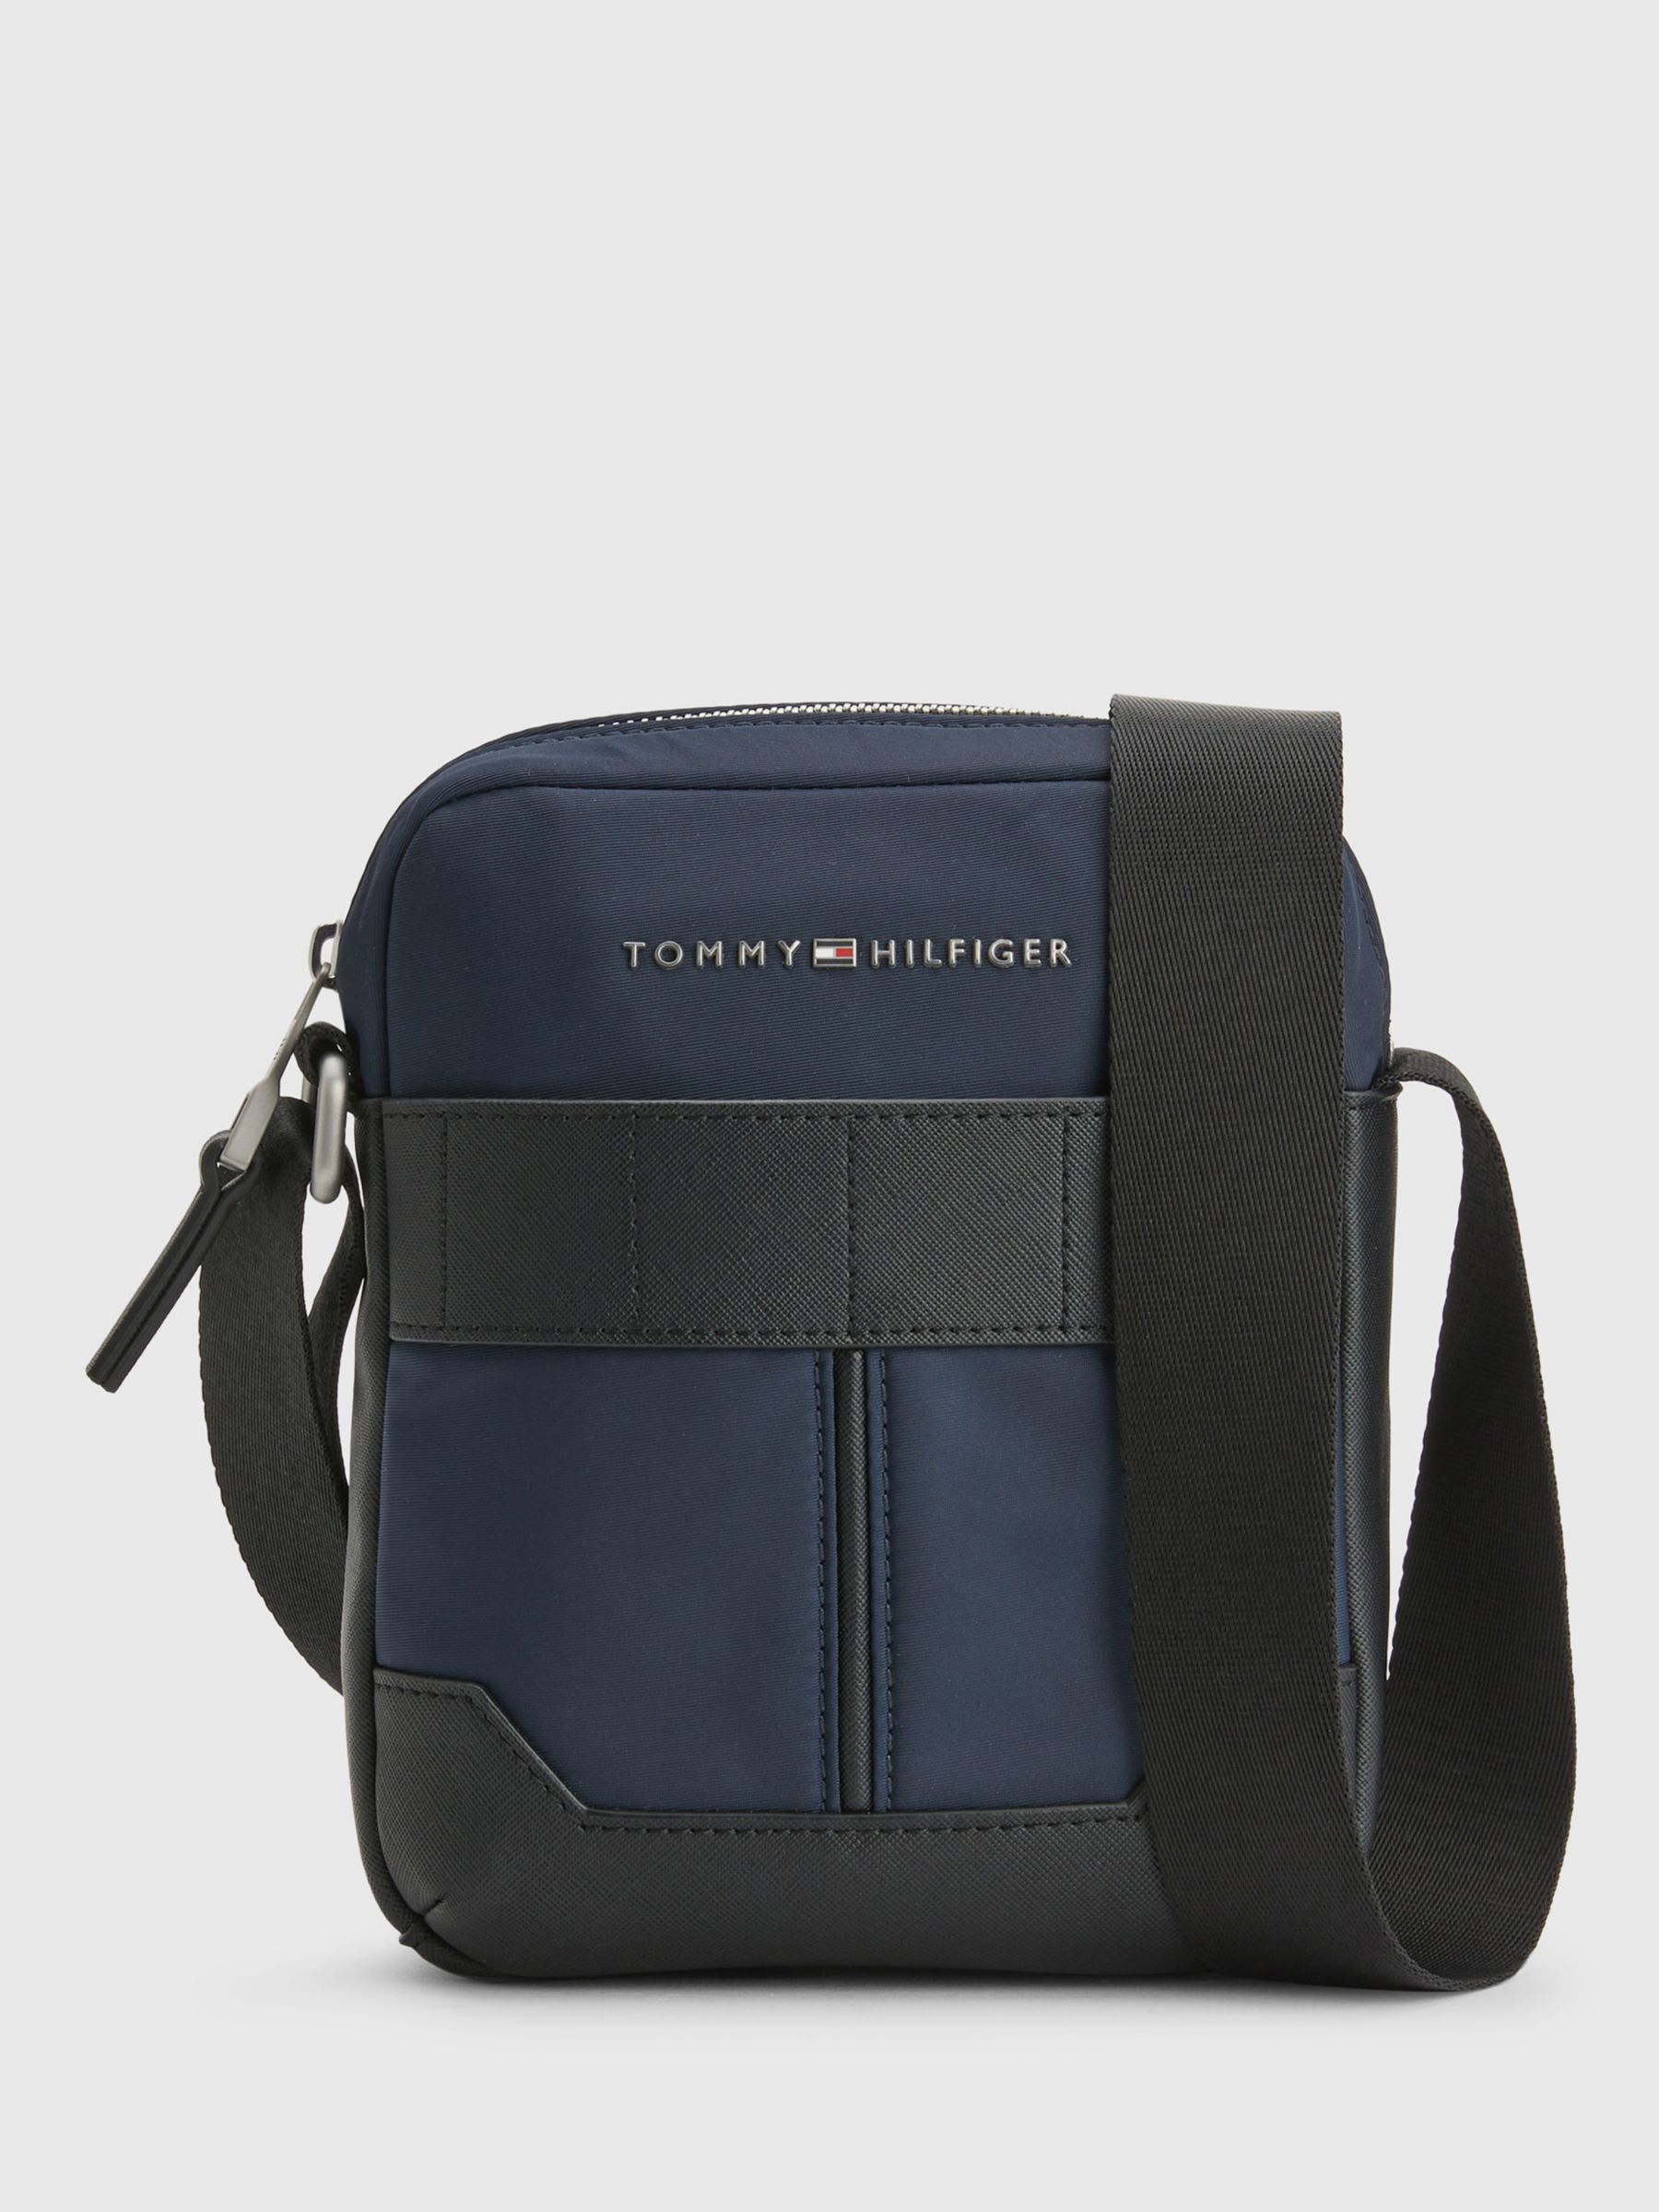 Tommy Hilfiger Mini Reporter Bag, Space Blue at John Lewis & Partners